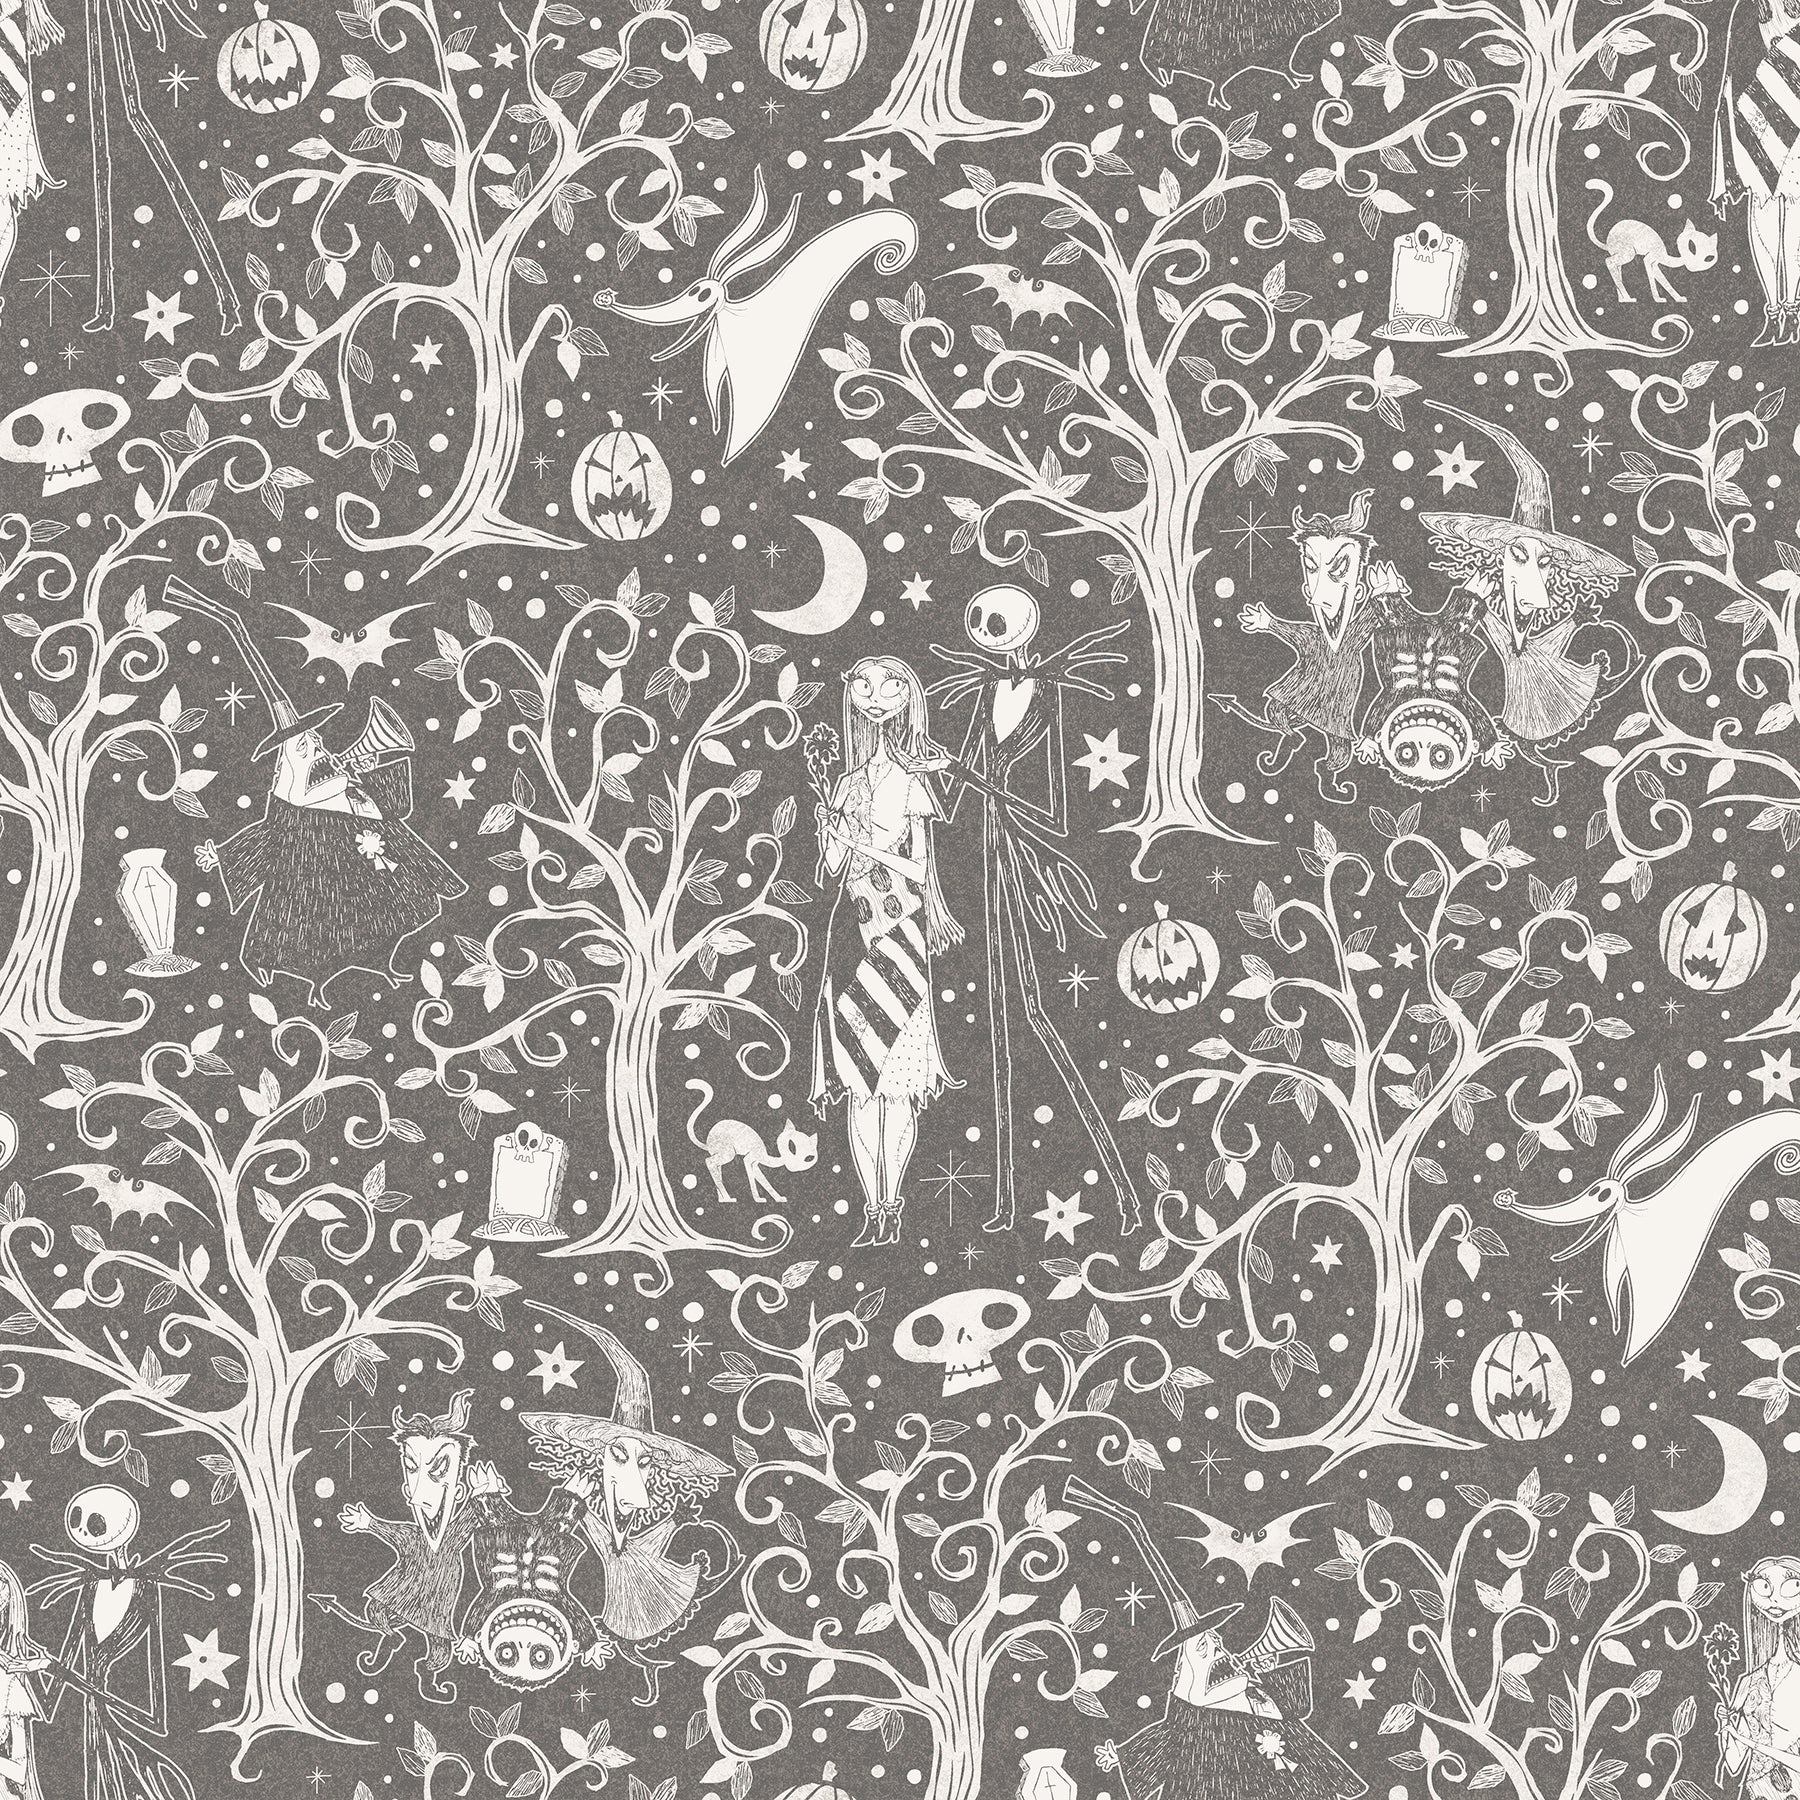 Disney Tim Burton's The Nightmare Before Christmas Forest Peel & Stick Wallpaper Peel and Stick Wallpaper RoomMates Roll Grey 